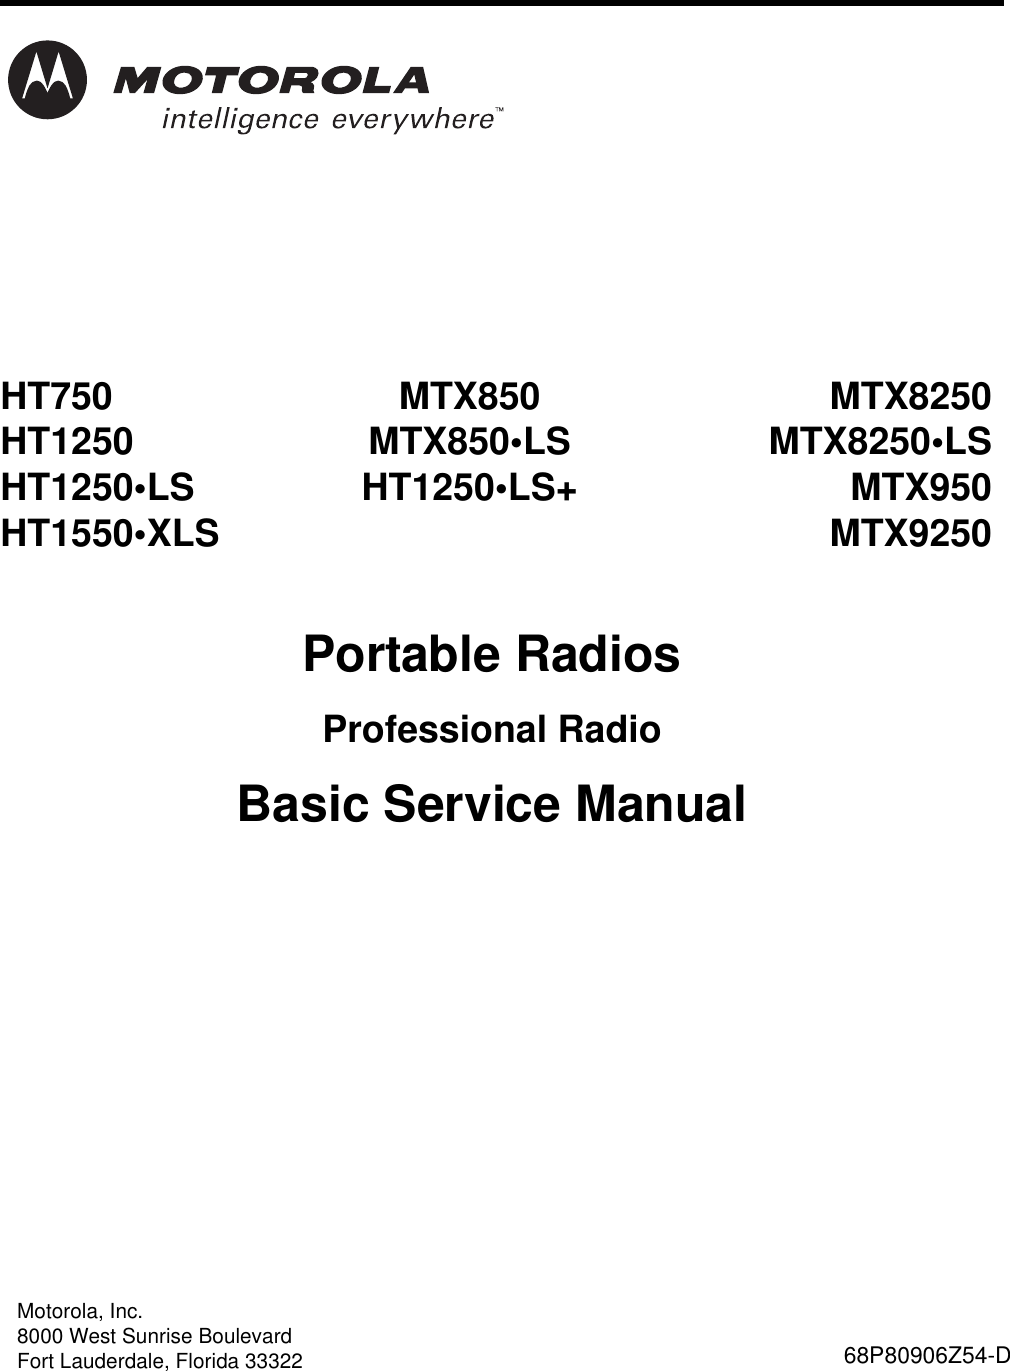 motorola cps software for ht1250